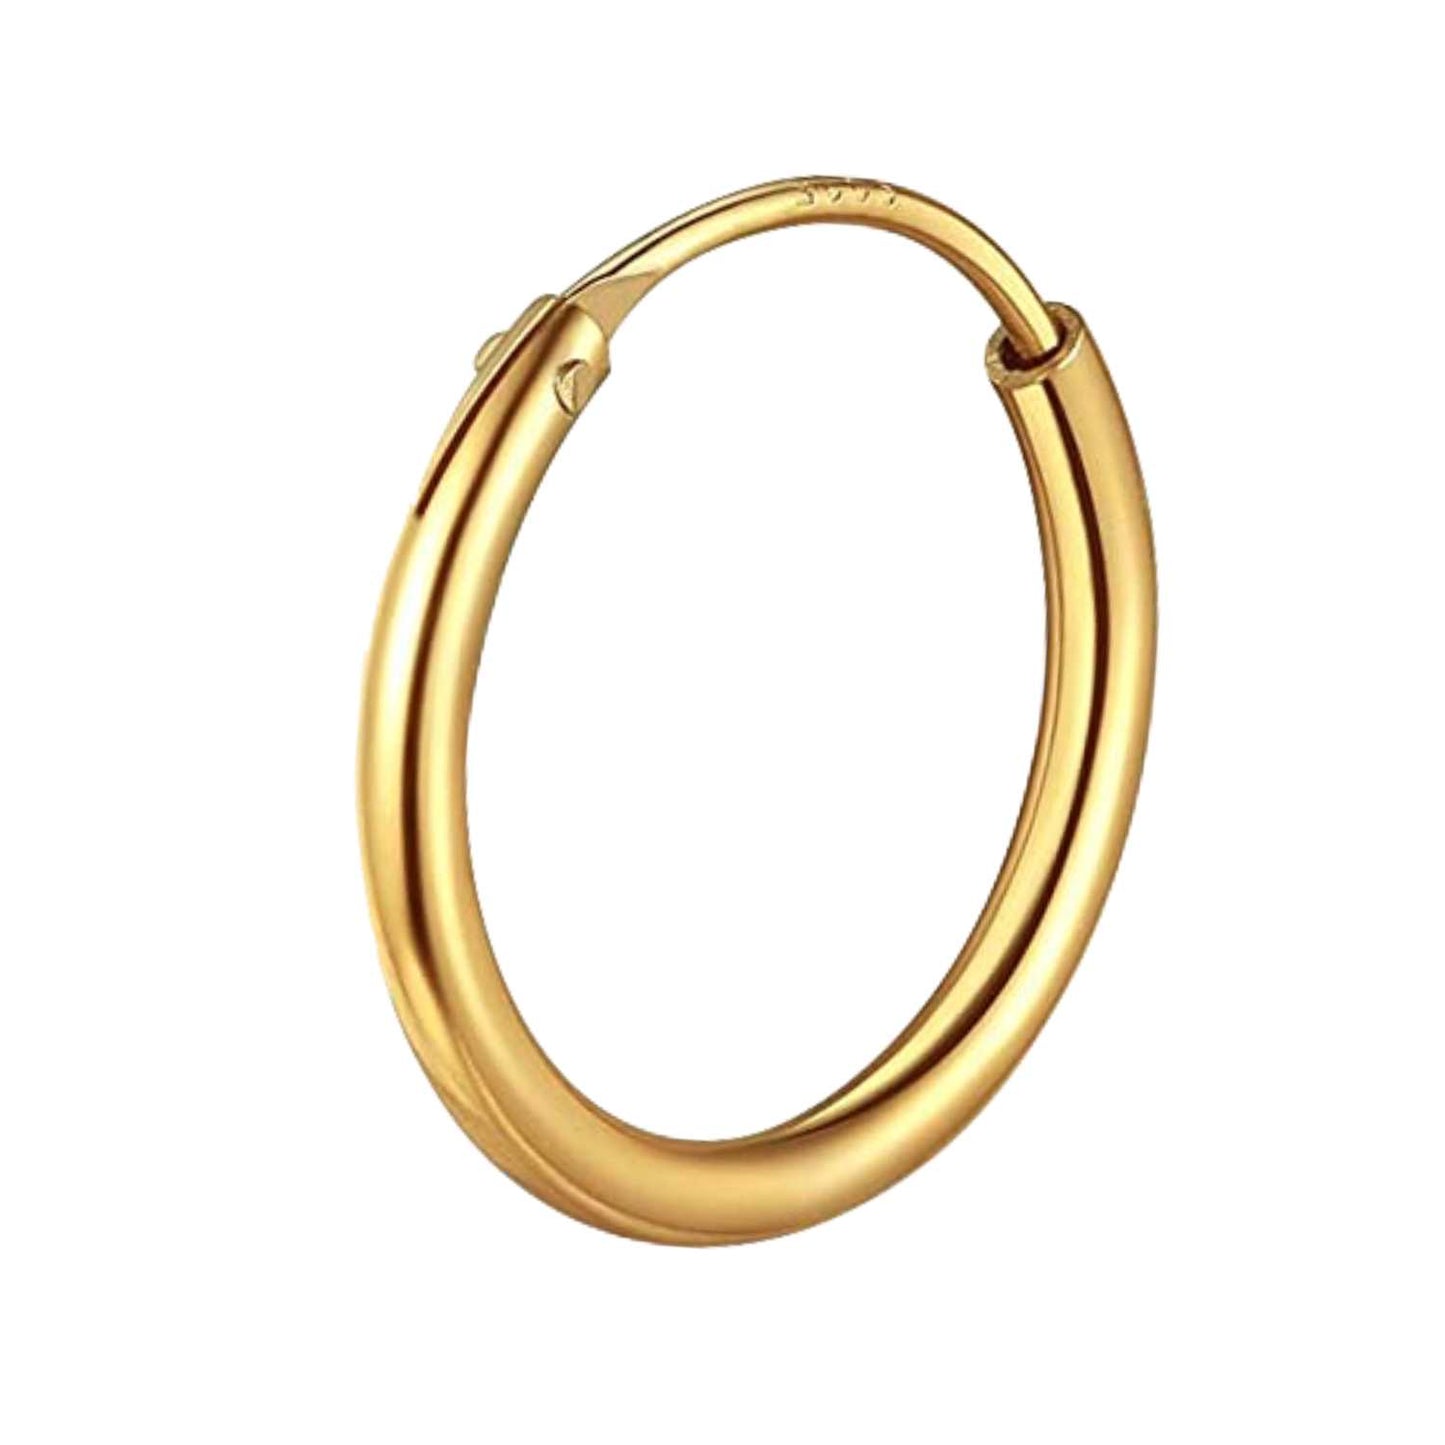 Mens Gold Thick Hoop Earrings in 92.5 Sterling Silver - Round Classic Hoop - Sizes 12mm to 20mm on 18K Gold Finish